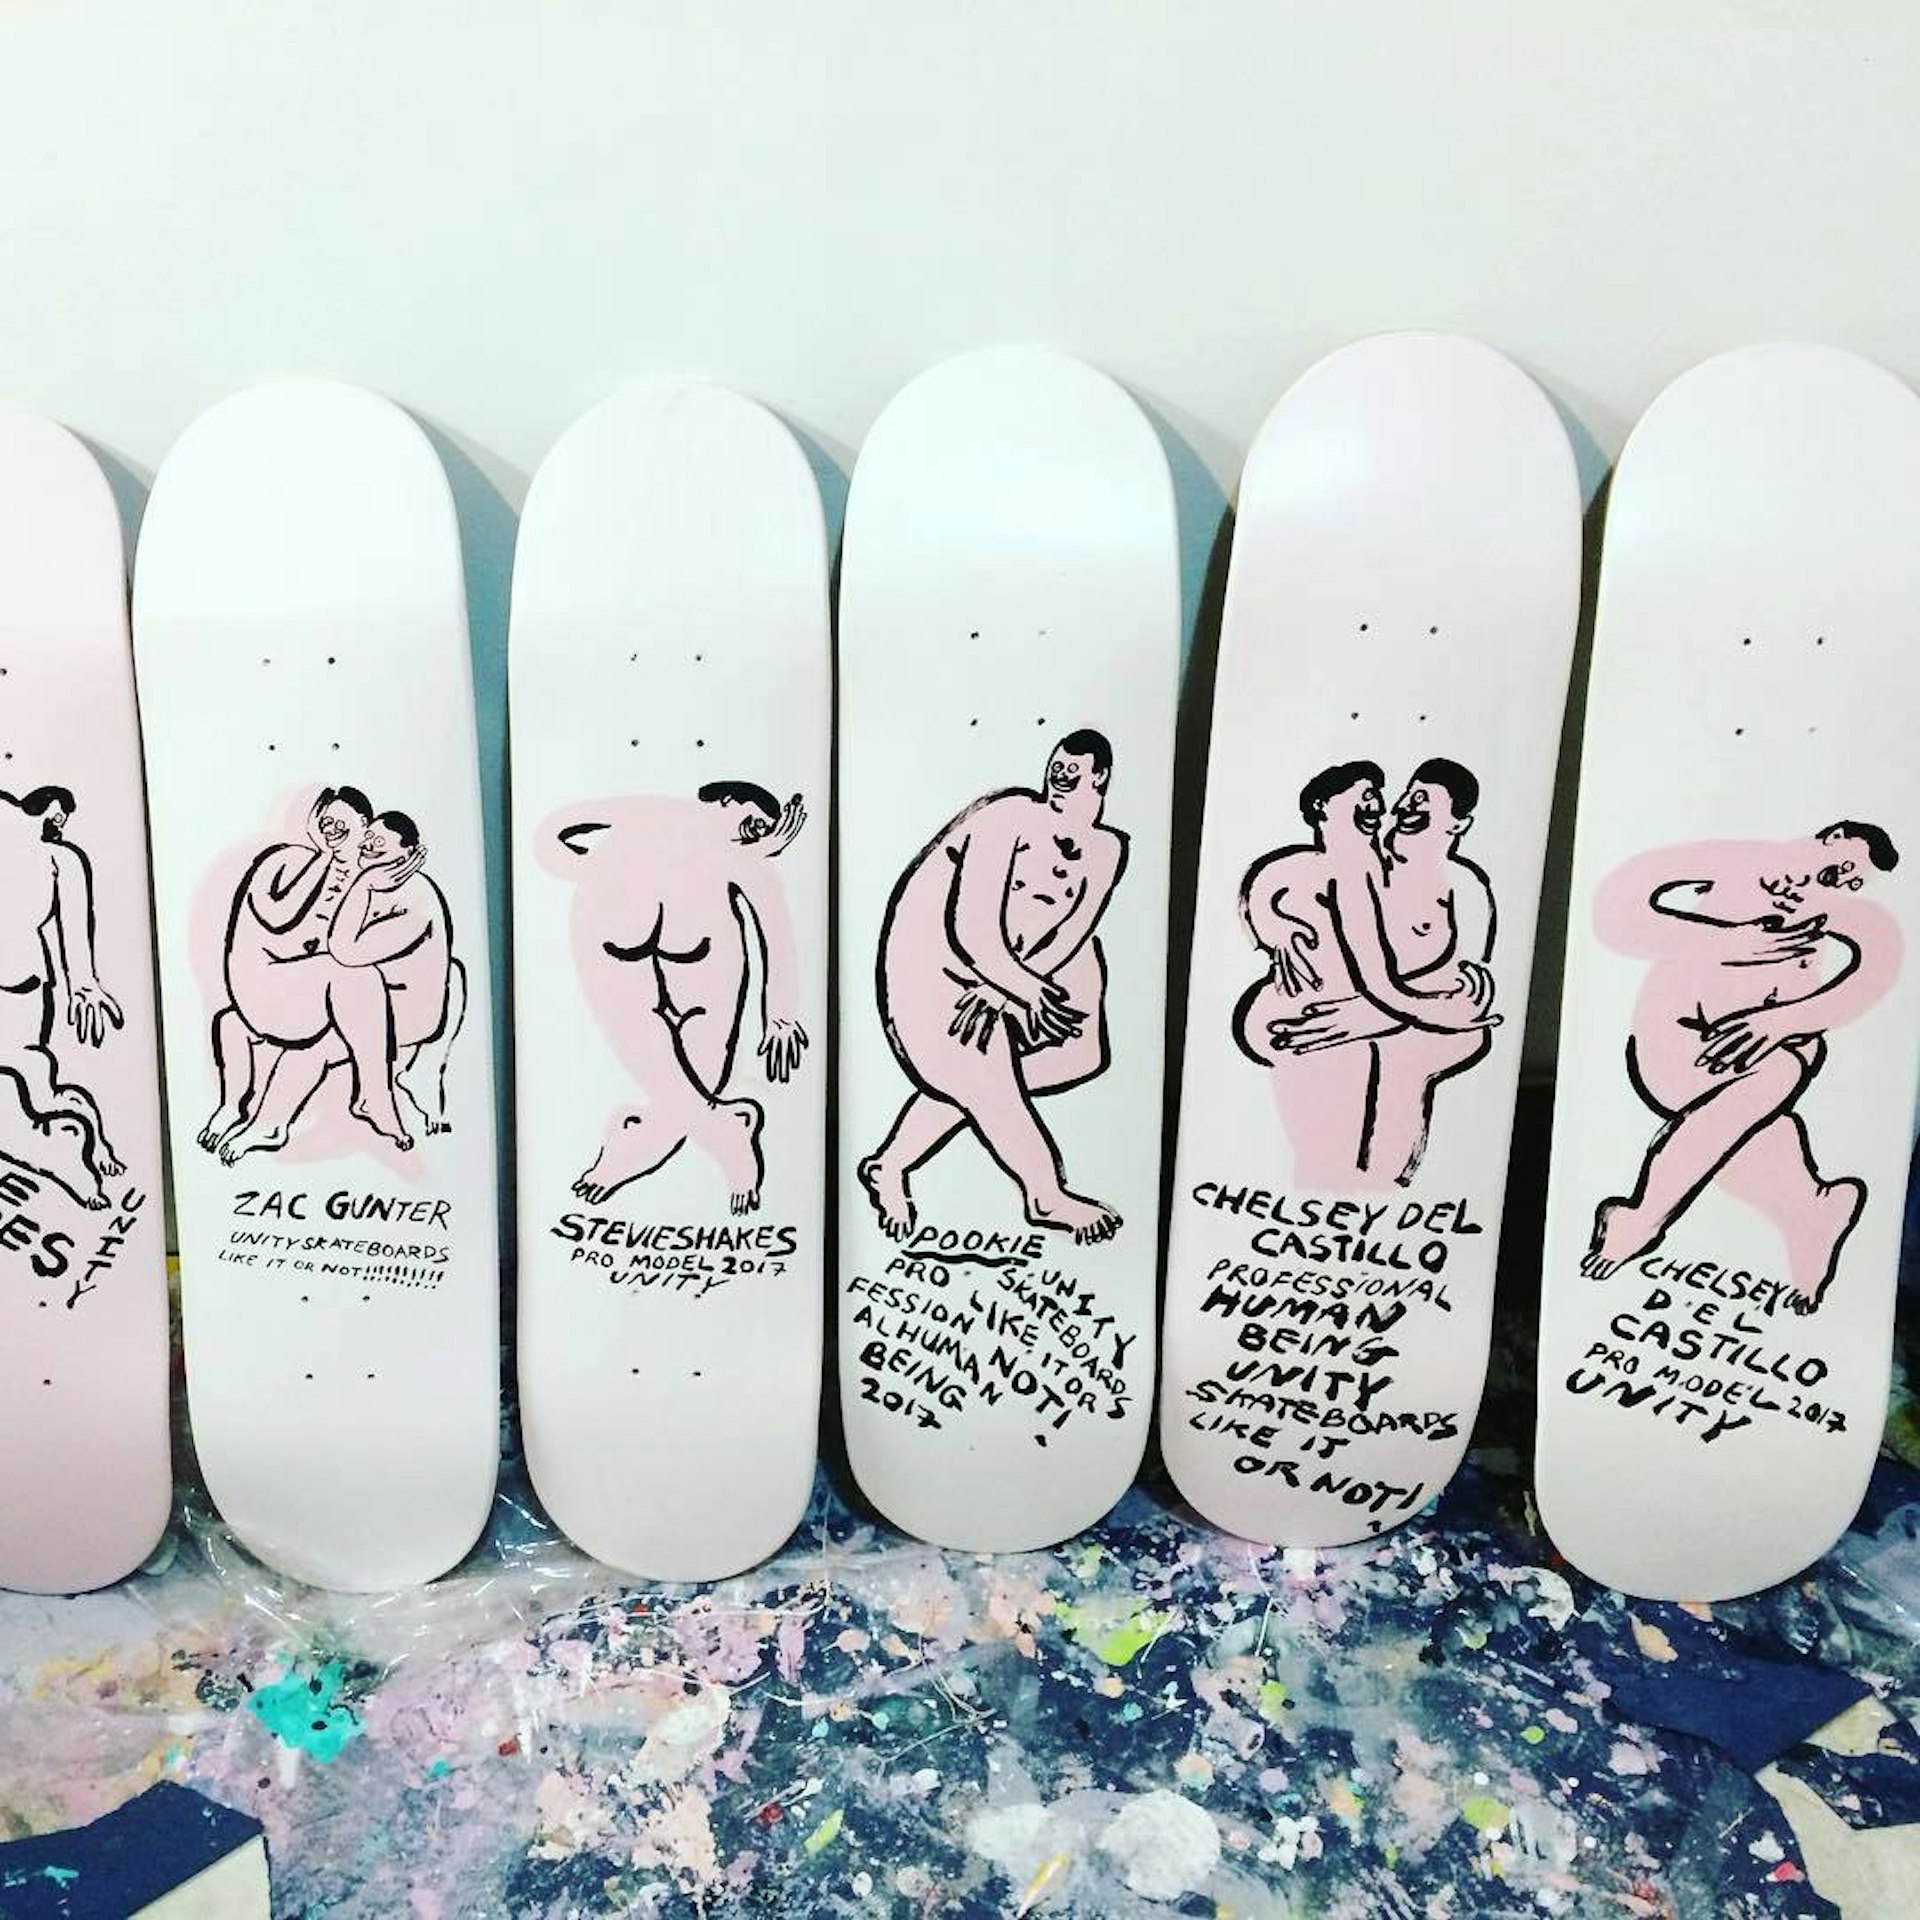 Meet the artist bringing queer culture to skateboarding